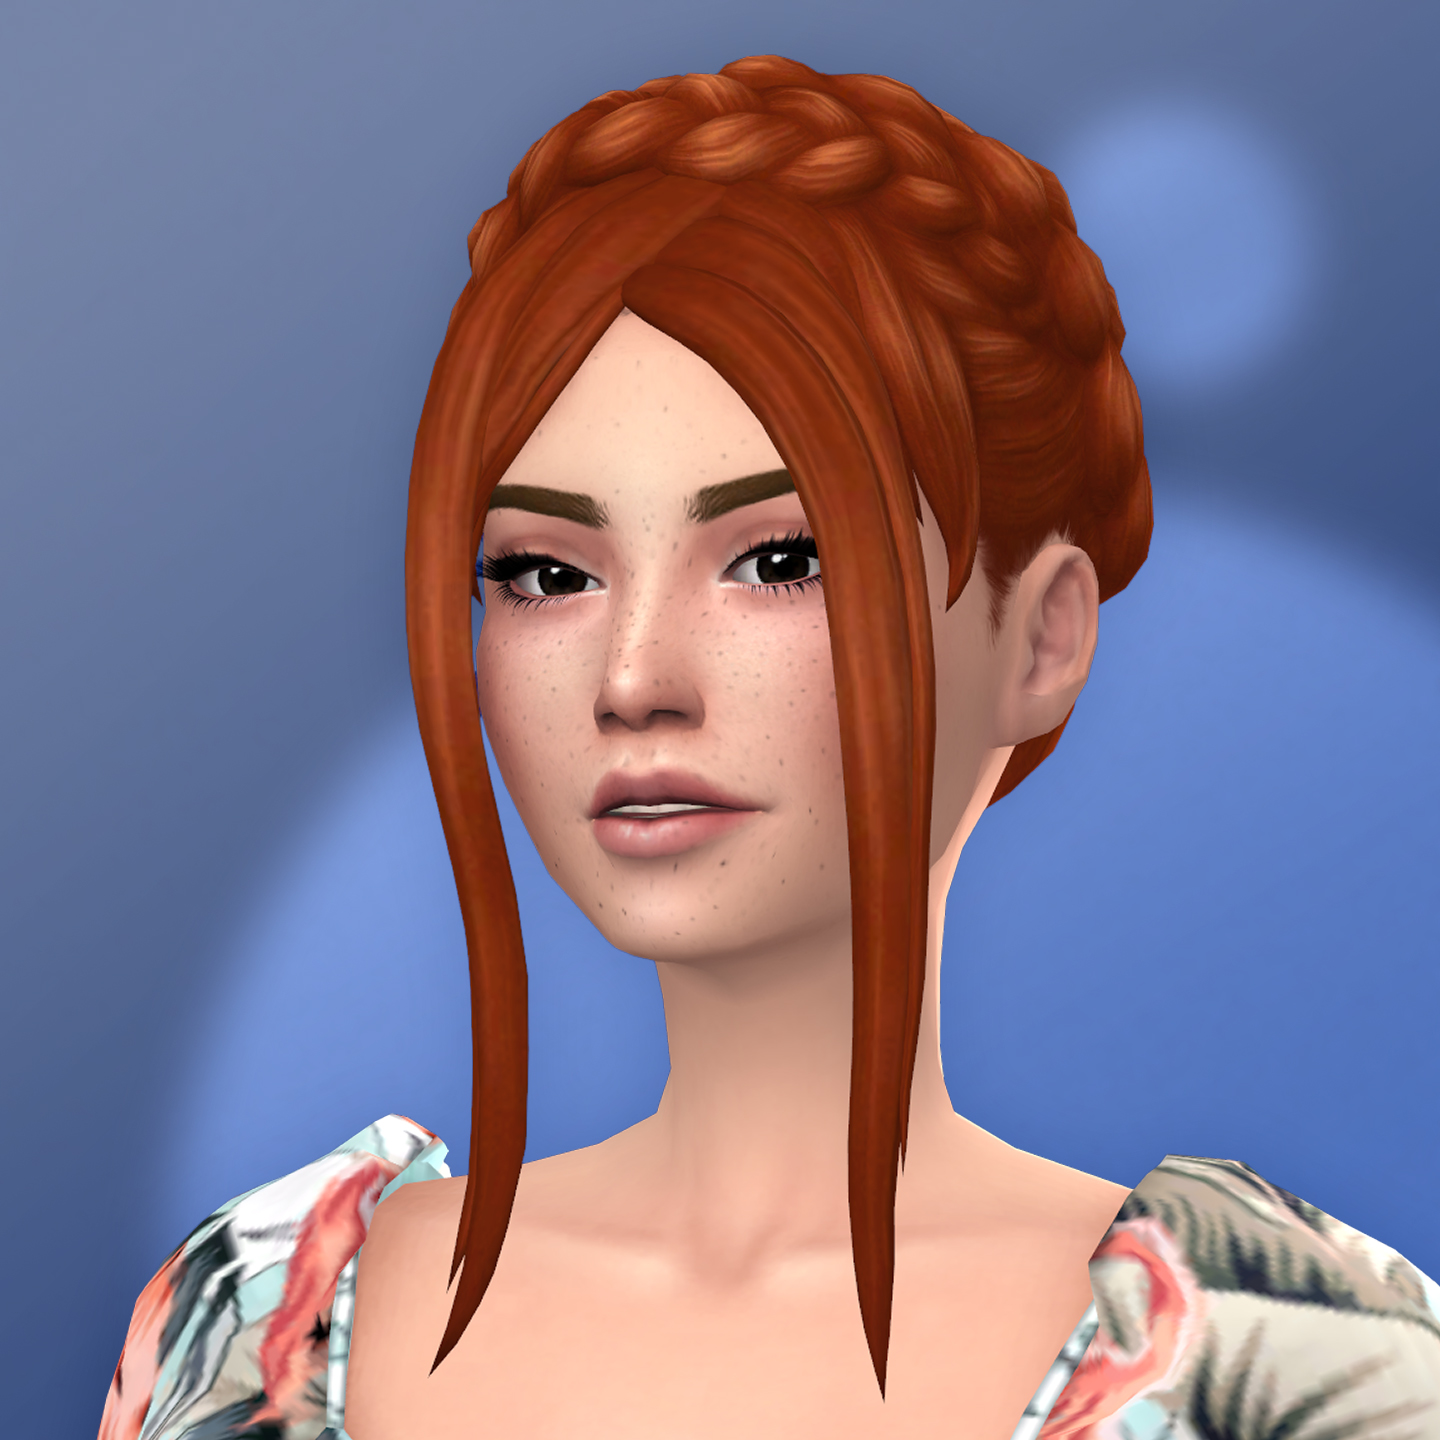 Download QICC - Hope Hair - The Sims 4 Mods - CurseForge